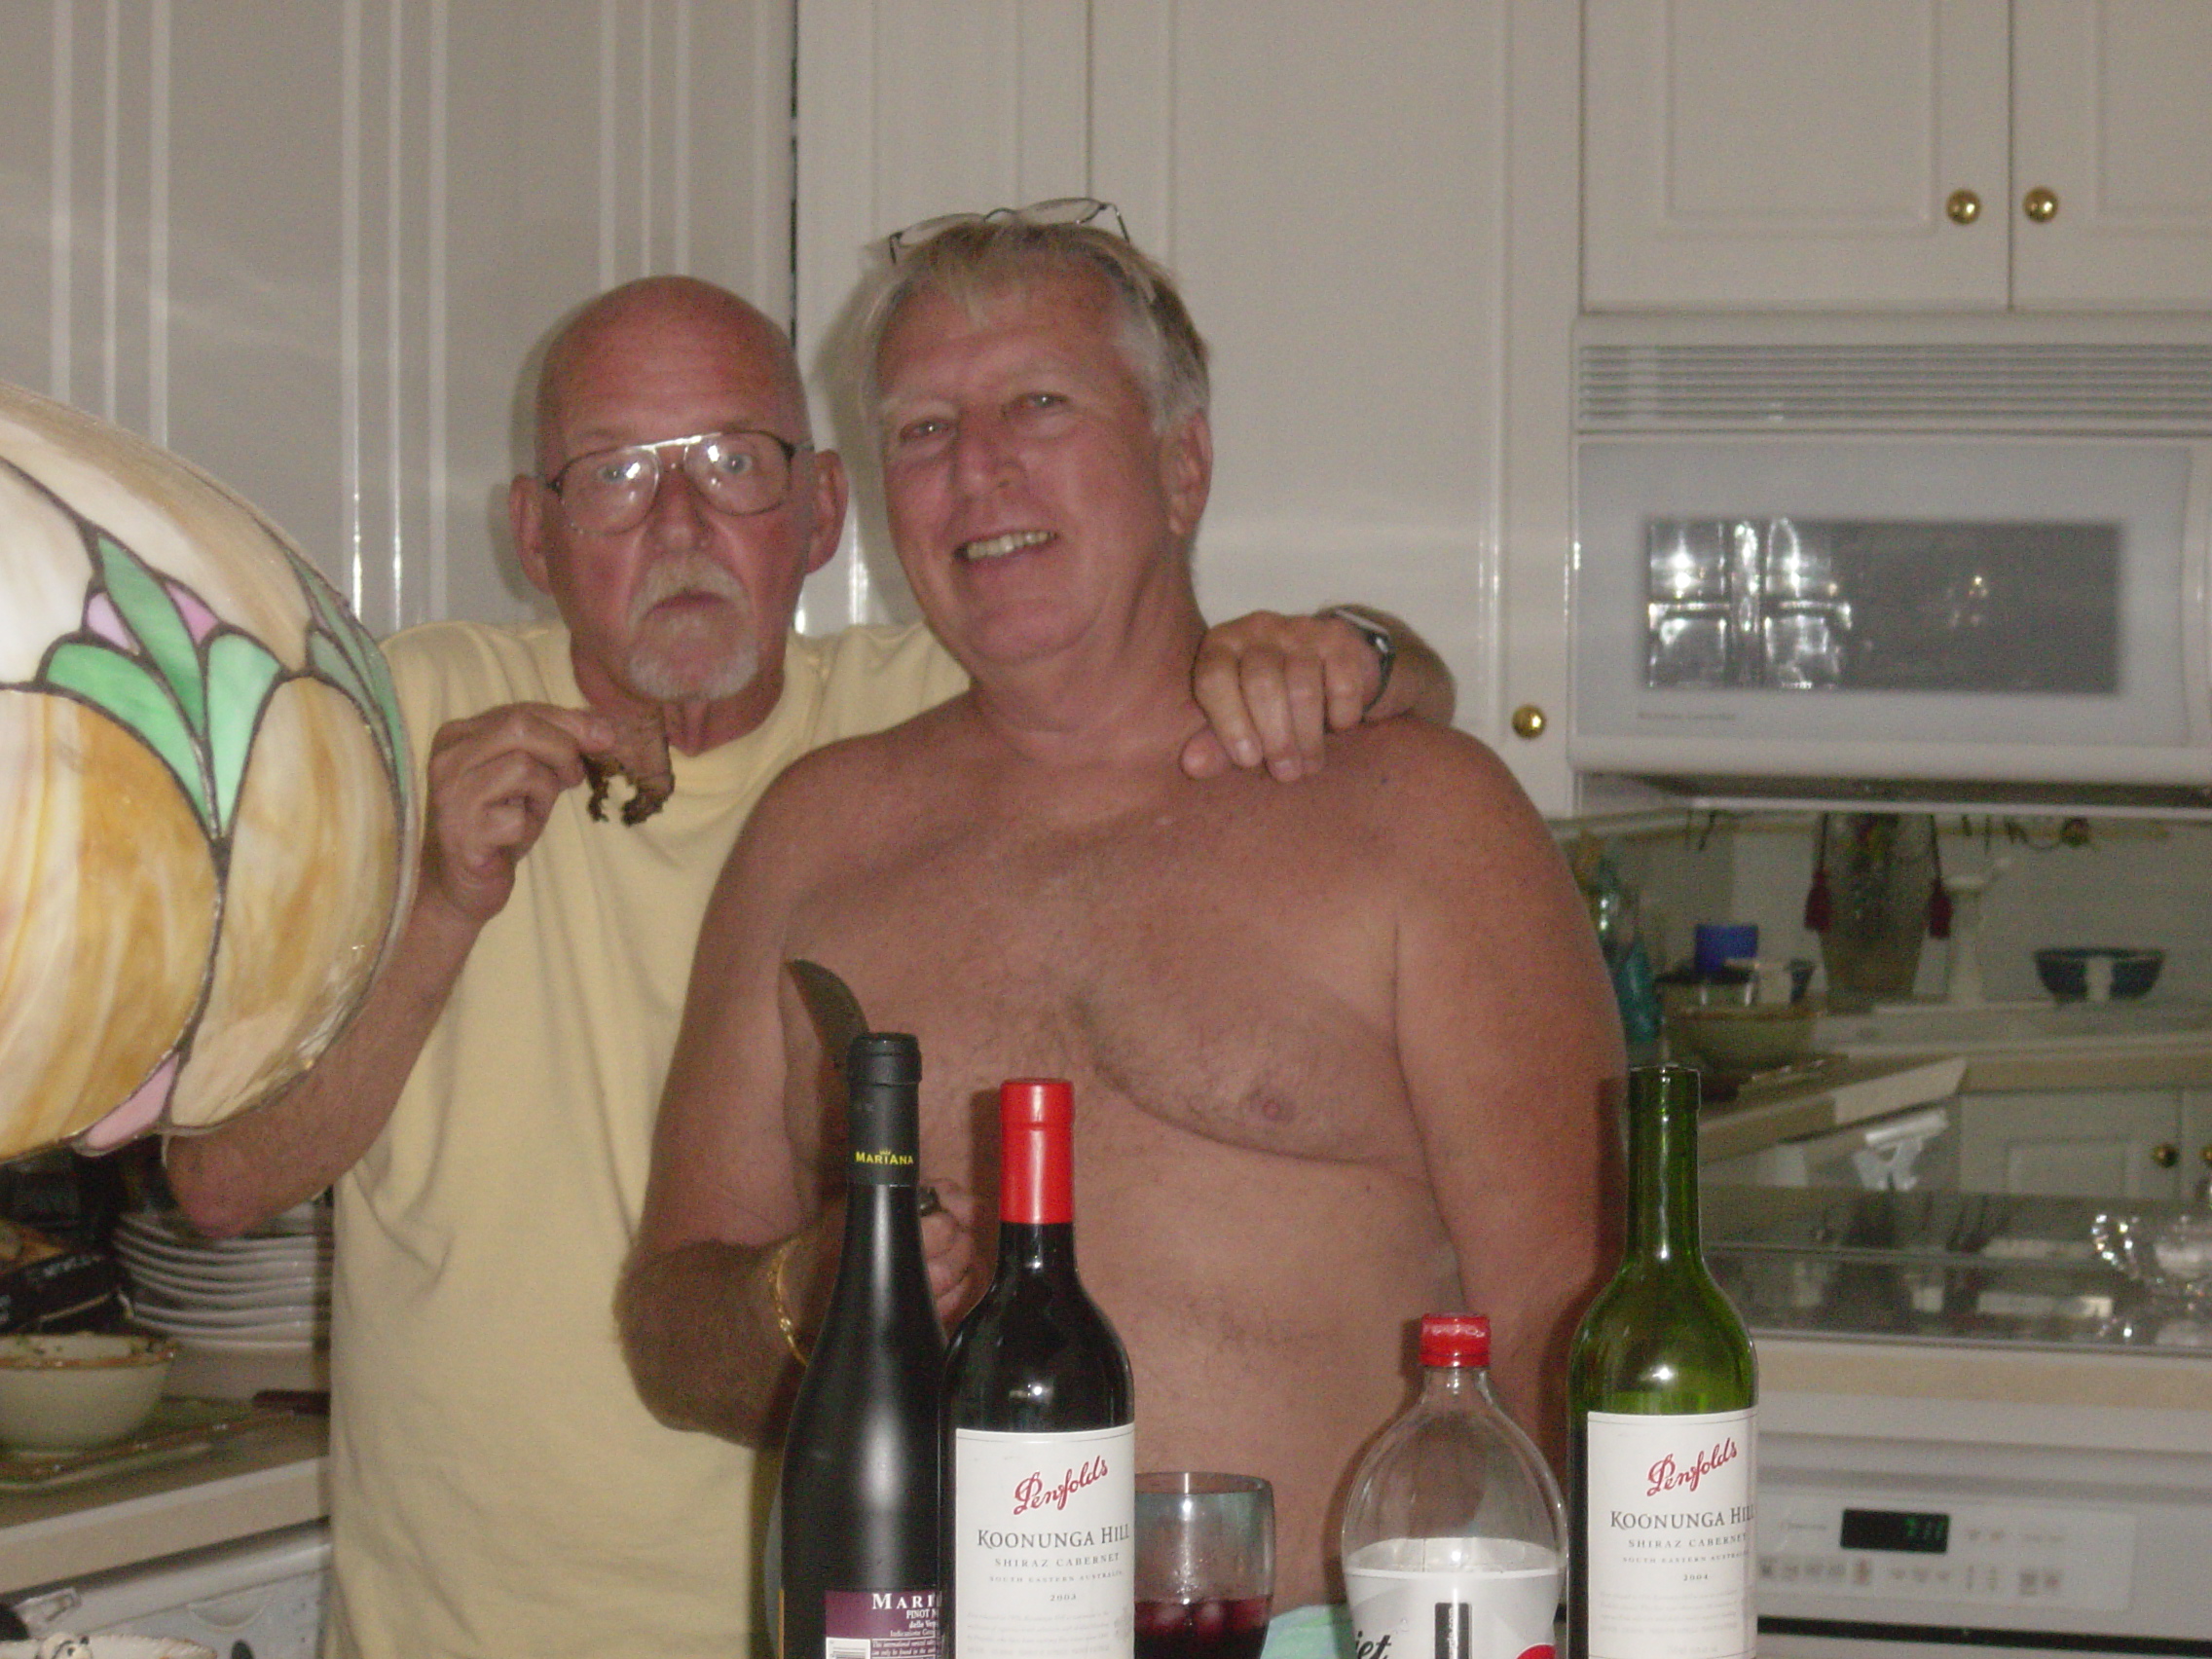 RIP dick, remembering this at christmas 2007 with bill. You were a dear friend to all. my heart and condolences goes out to you chuck. Loss is never easy, you are in my thoughts. I am one of the privilaged to have known Dick and enjoy his company. respectfully Pery-Nicholas